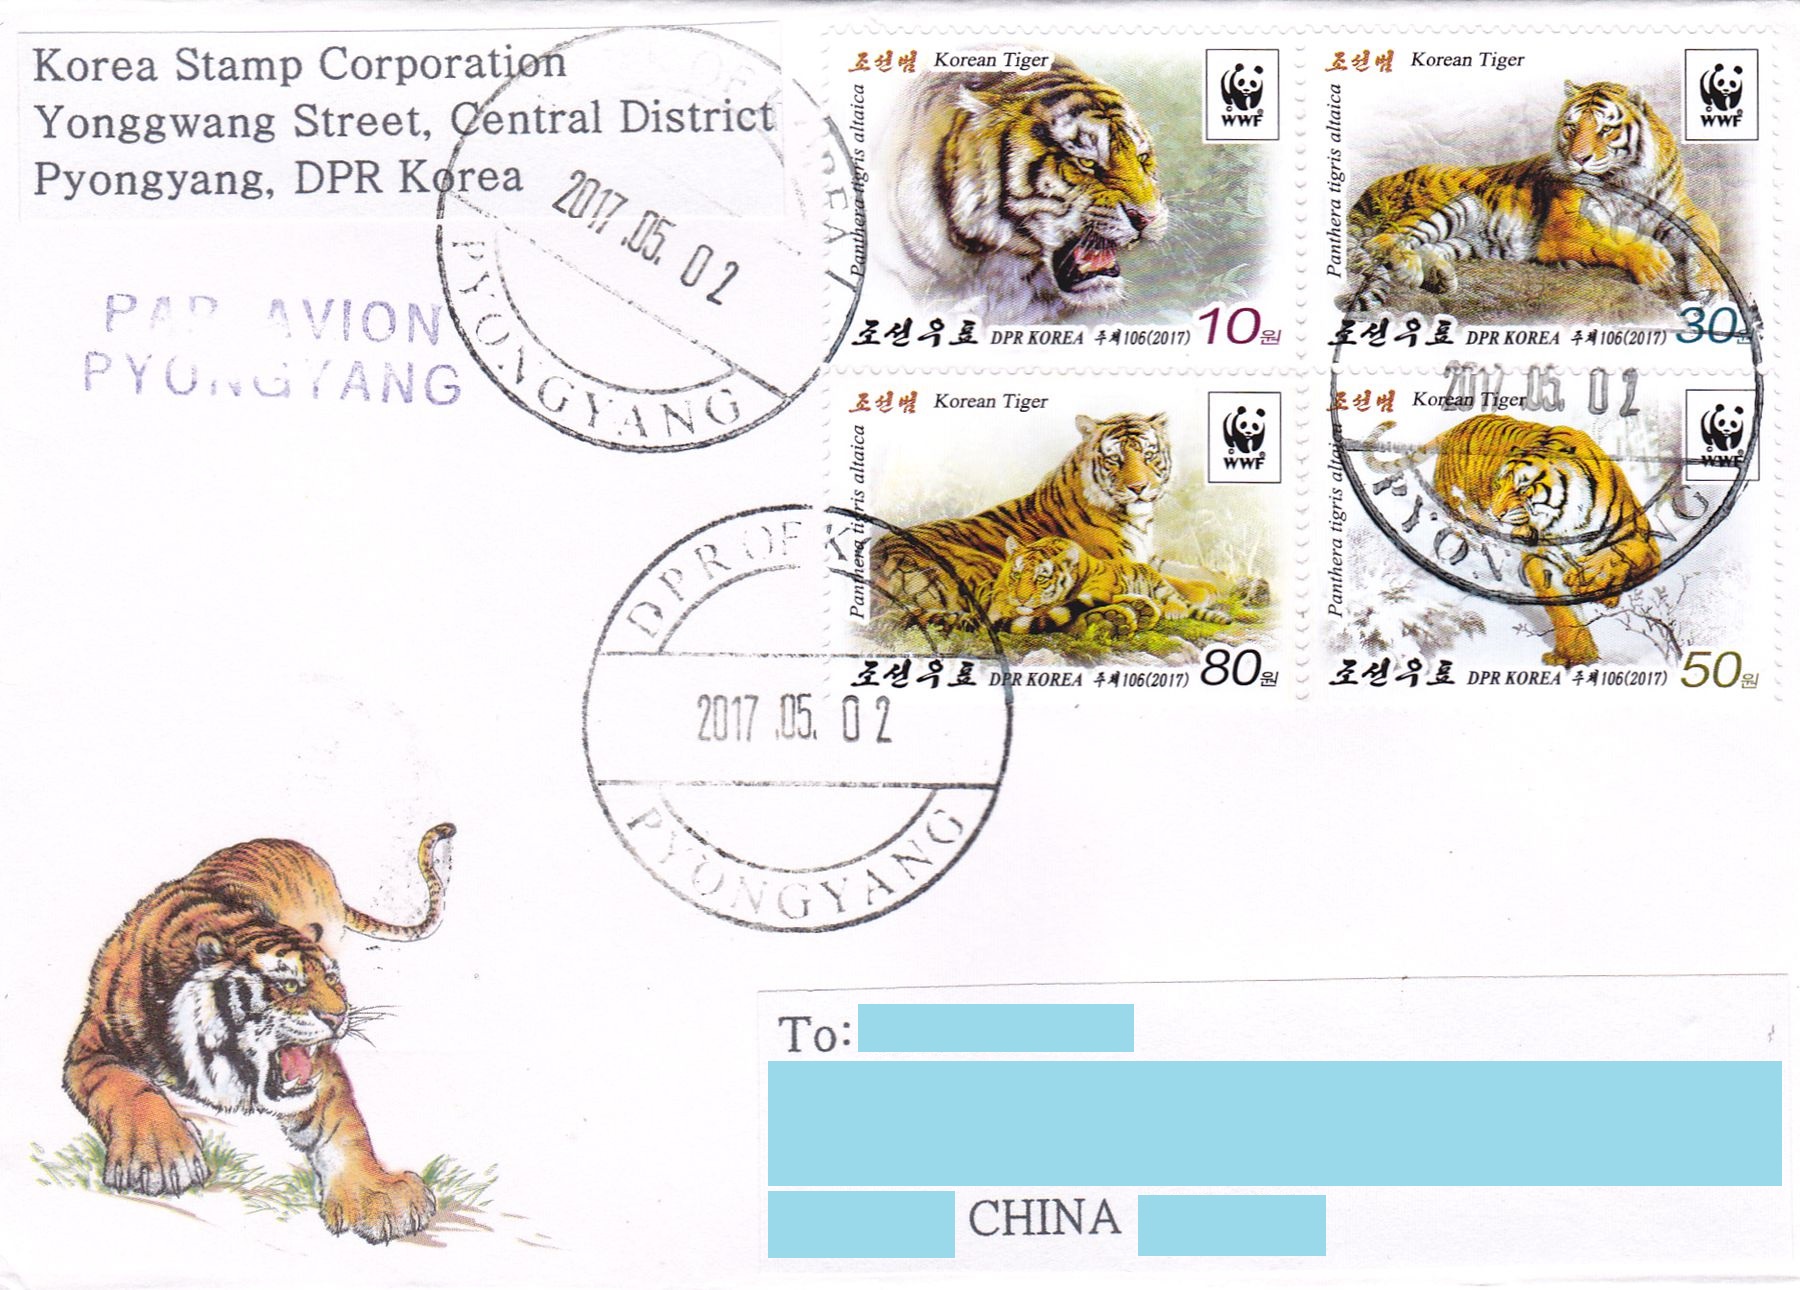 L9678, Korea "Tiger", FDC Stamps, from Korea to China 2017